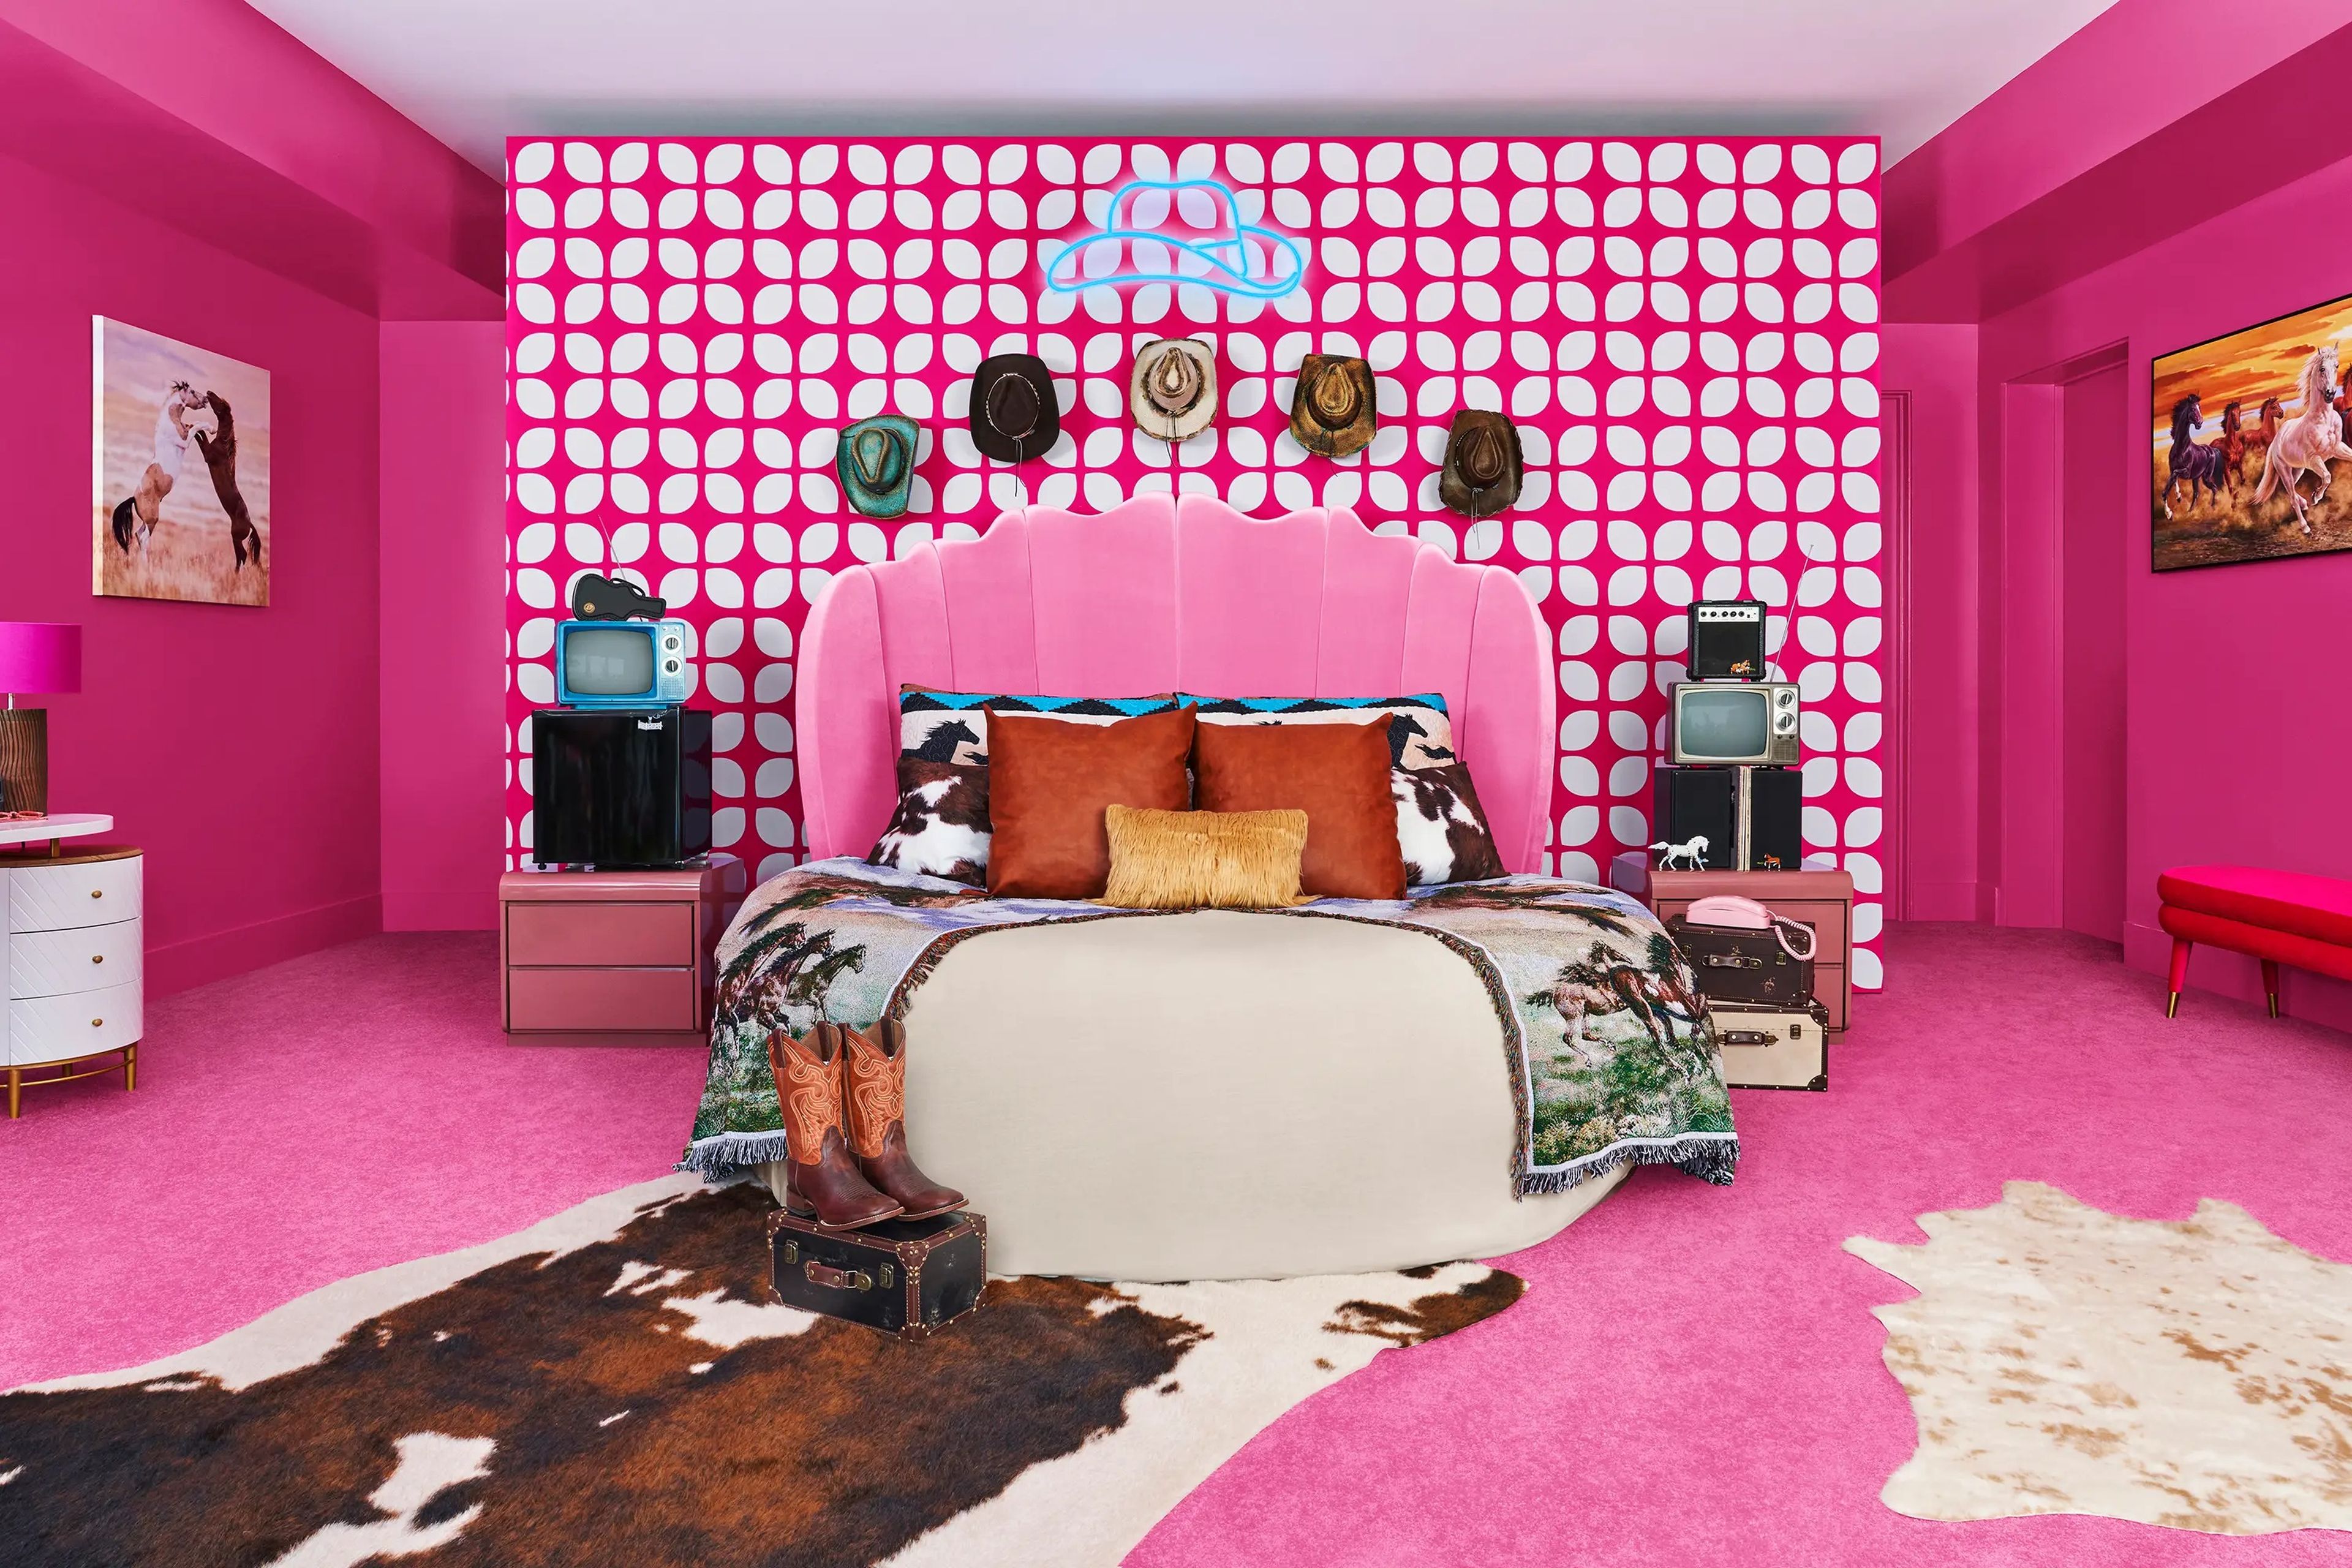 The master bedroom comes with hot pink floors and walls. Cowboy hats line the walls as part of the decor.